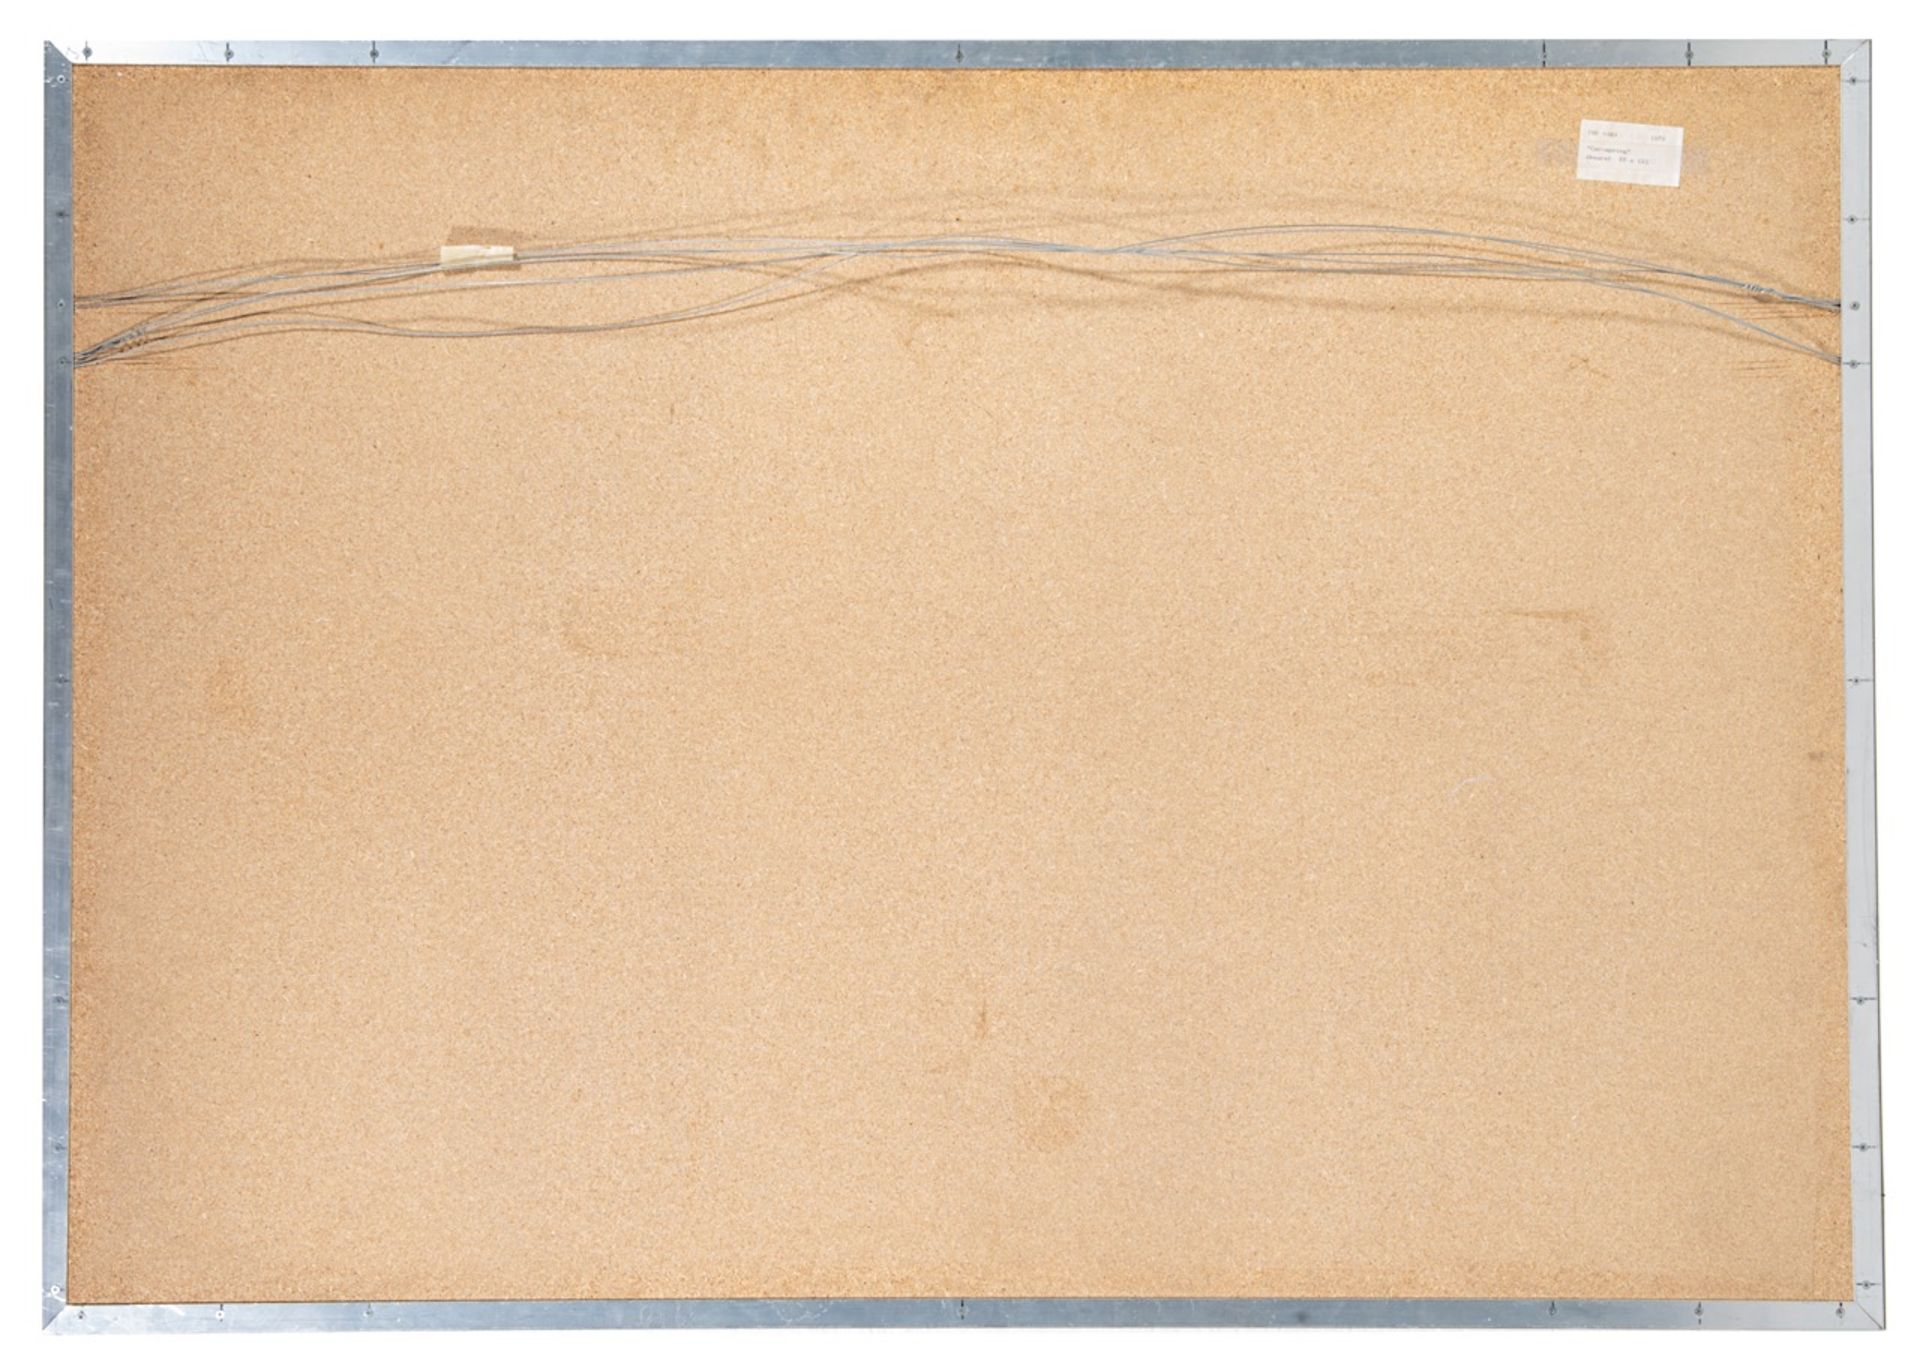 Pol Mara (1920-1998), Car spring, watercolour on paper, 1989 88 x 125 cm. (34.6 x 49.2 in.) - Image 3 of 5